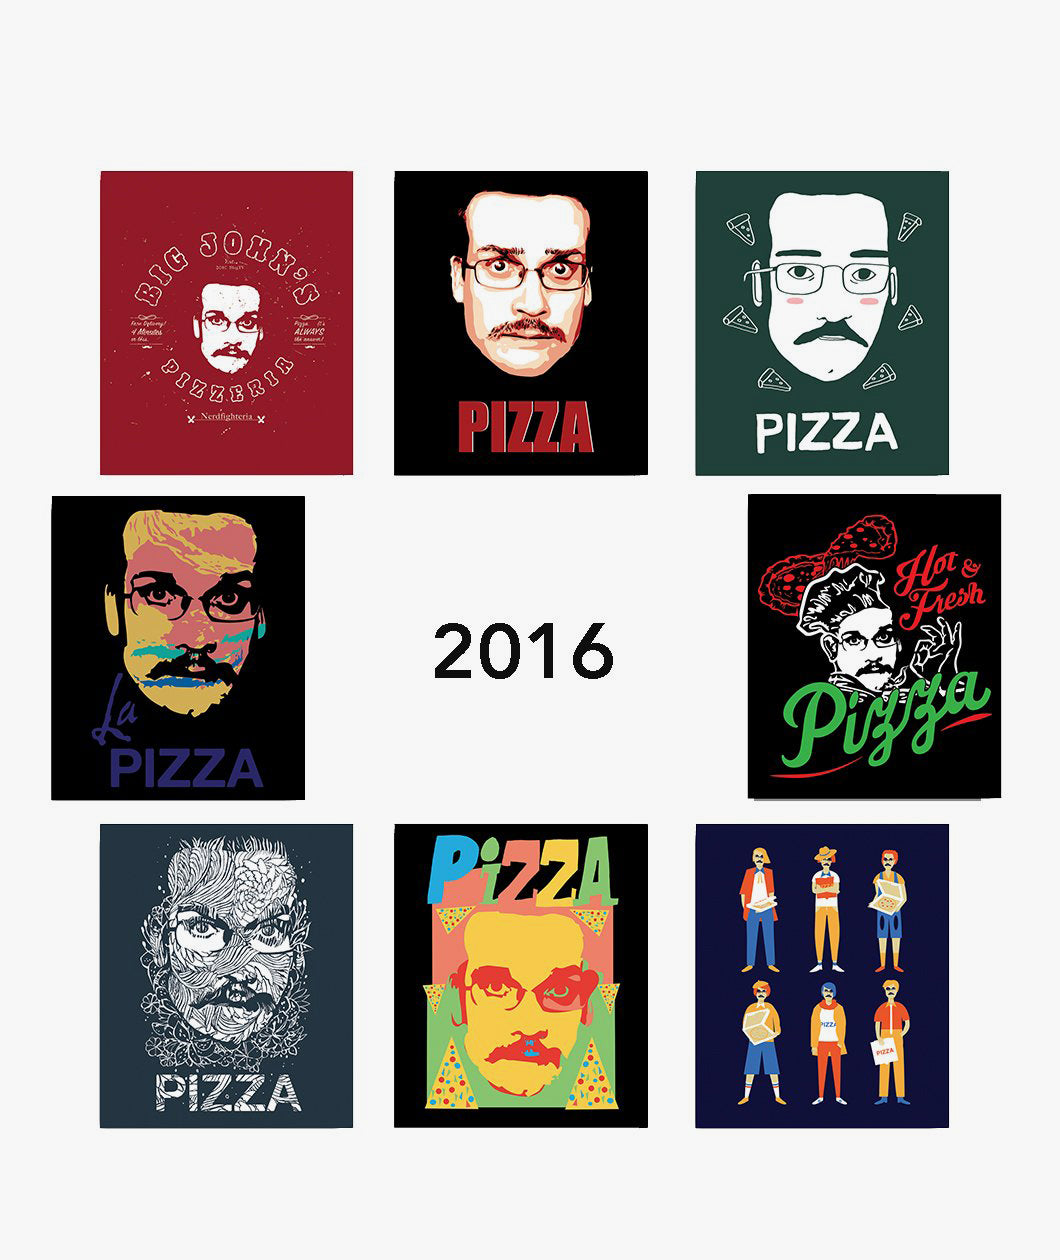 2016 Pizzamas Sticker pack featuring the 8 shirt designs from 2016. 